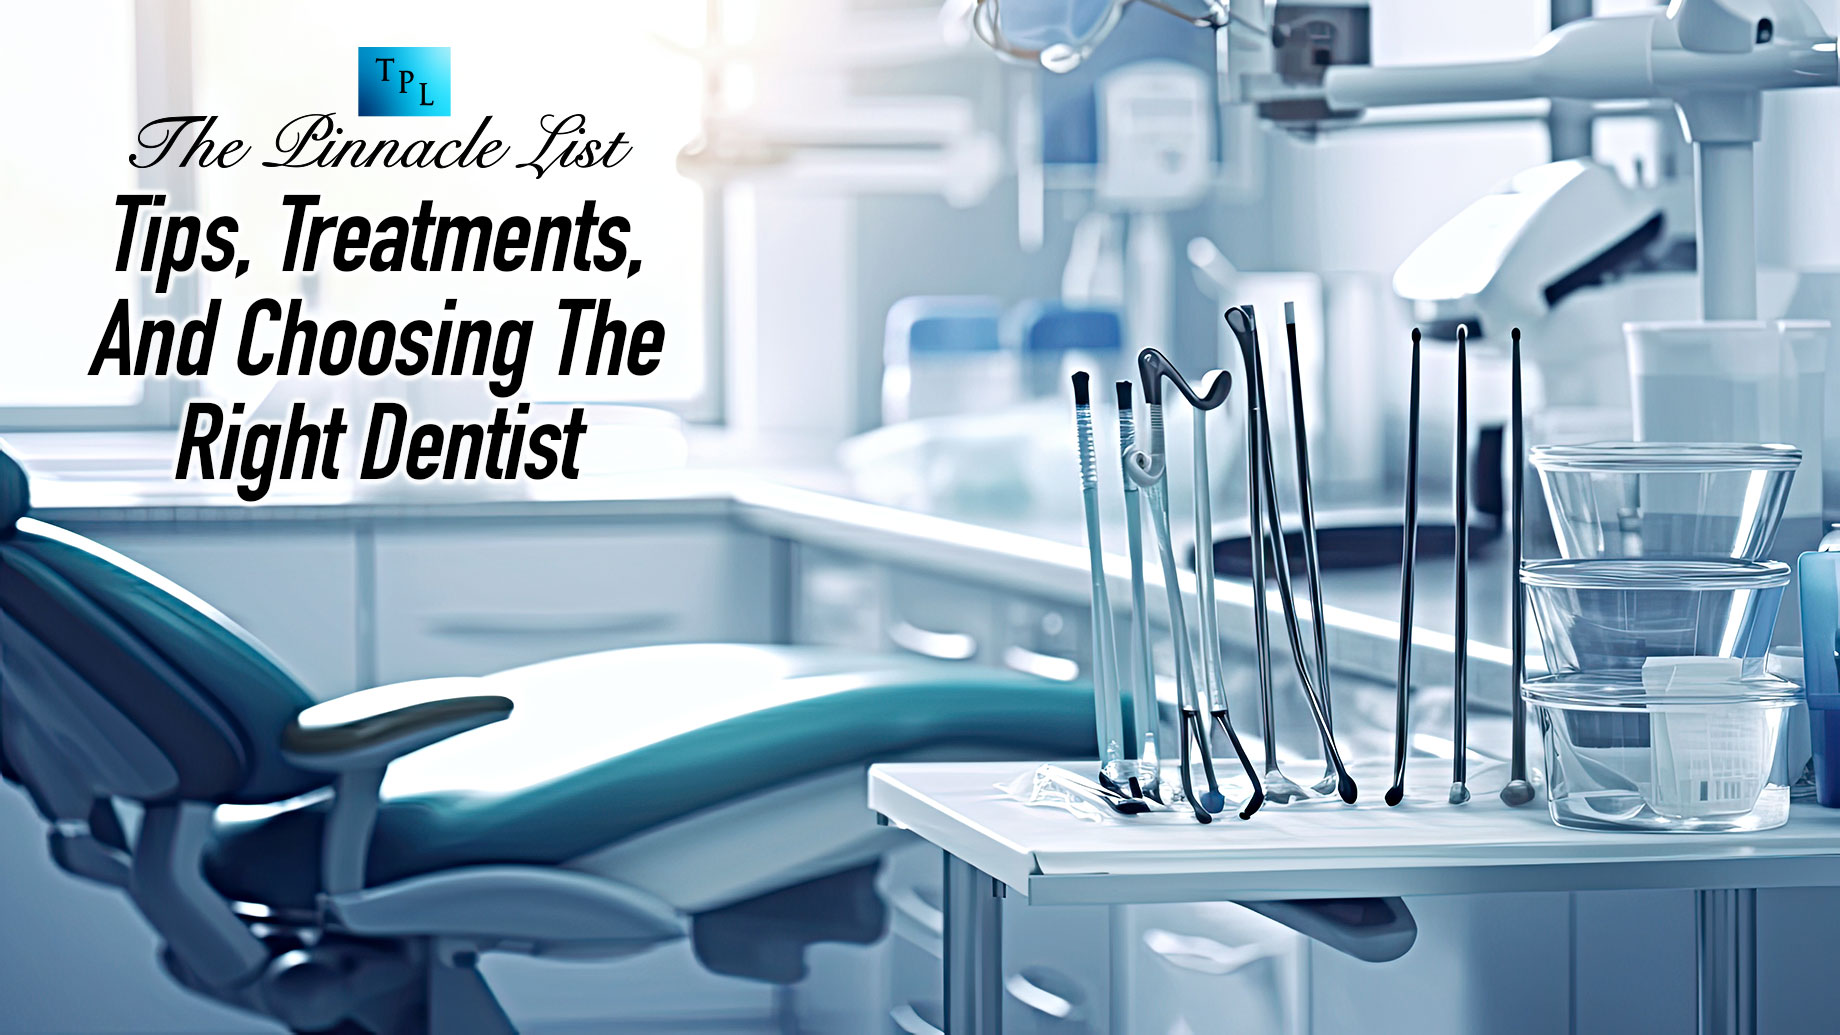 Tips, Treatments, And Choosing The Right Dentist